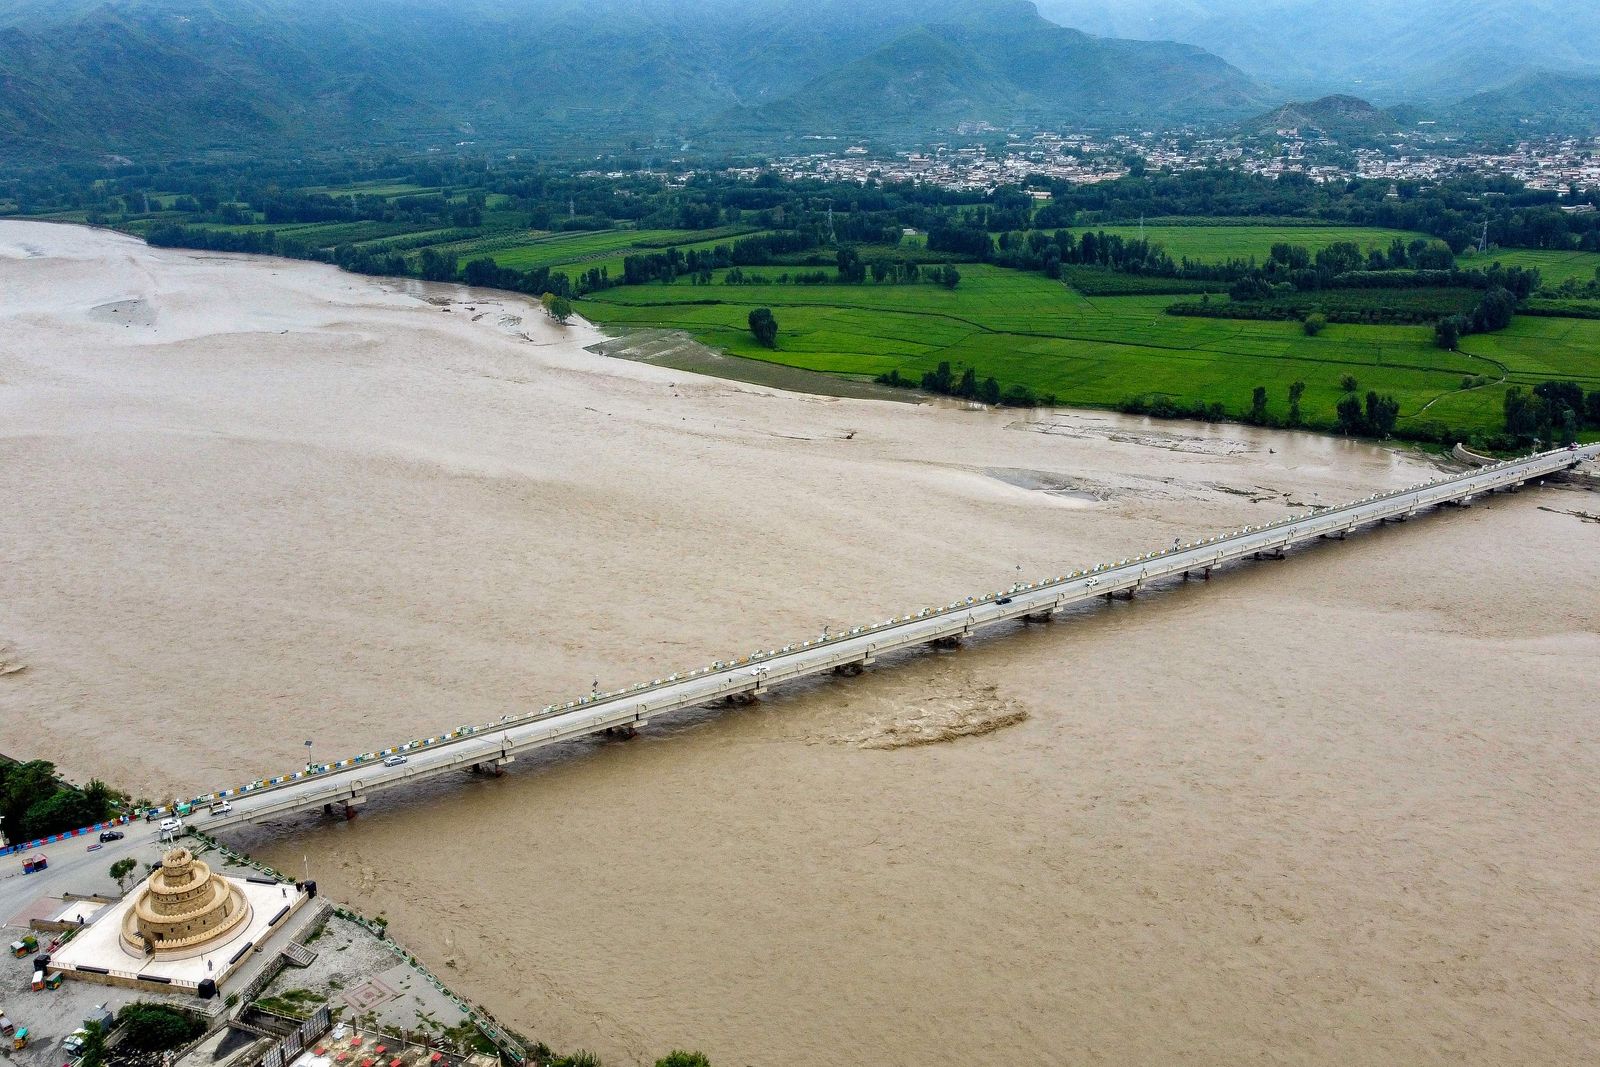 This aerial view of flooding is pictured in Mingora, a town in the Pakistan's northern Swat Valley following heavy monsoon rainfall on August 27, 2022. - Thousands of people living near flood-swollen rivers in Pakistan's north were ordered to evacuate on August 27 as the death toll from devastating monsoon rains neared 1,000 with no end in sight to the deluge. (Photo by Abdul MAJEED / AFP) - AFP